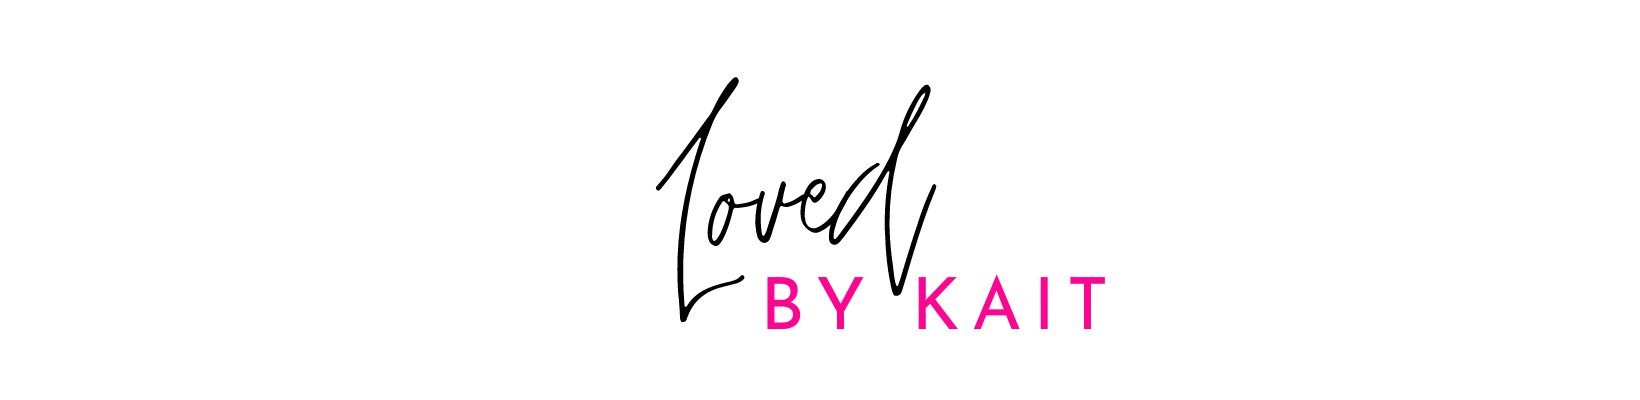 Loved by kait logo 1 (1).png